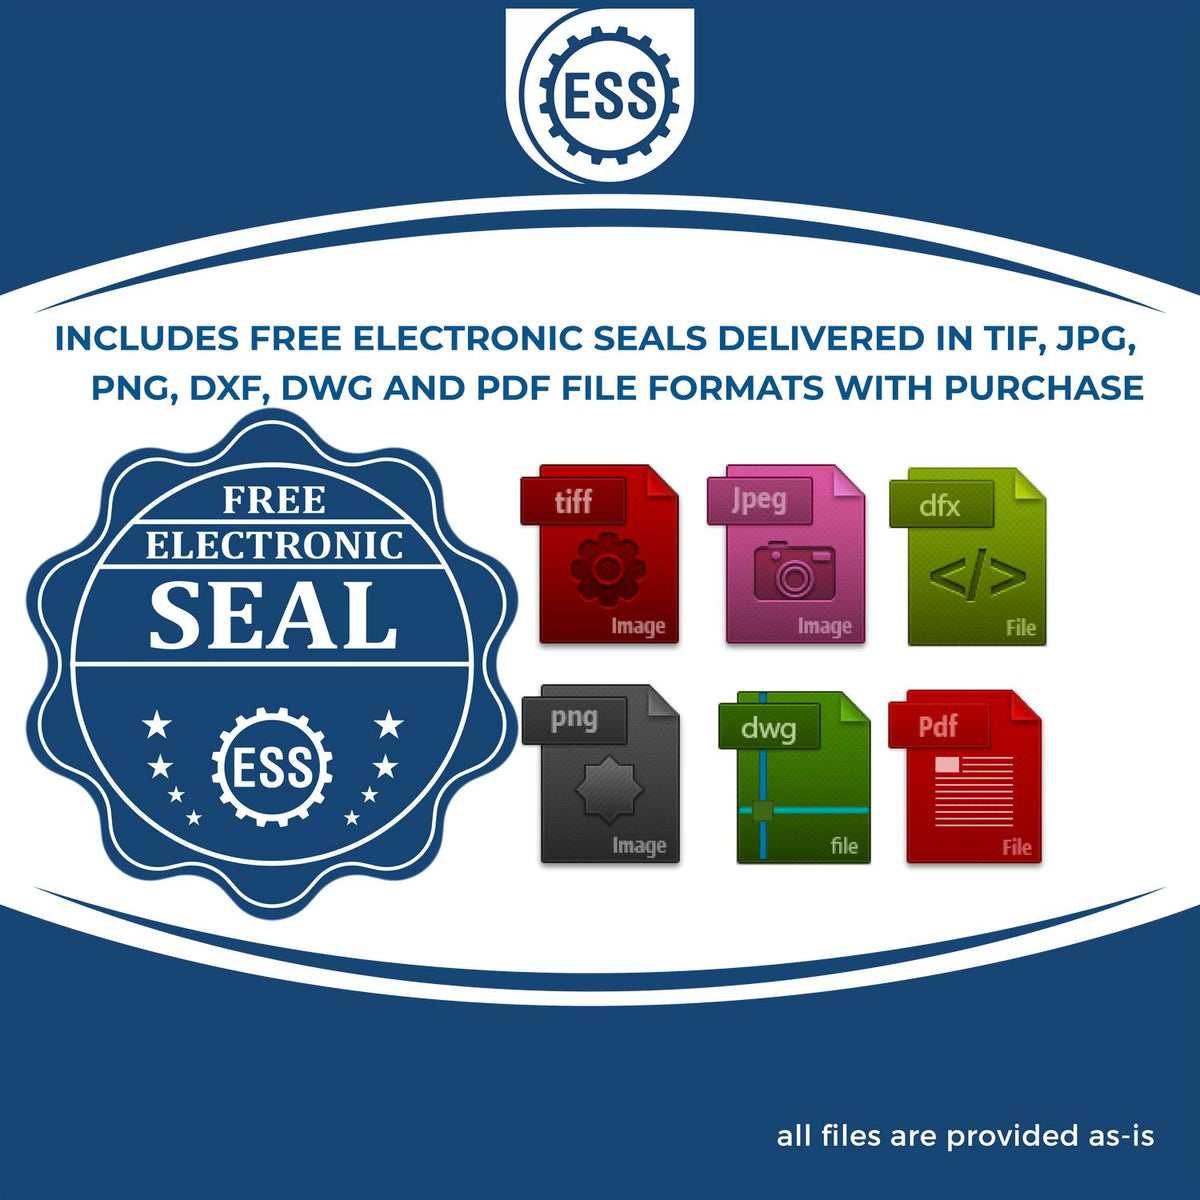 An infographic for the free electronic seal for the Slim Pre-Inked Illinois Professional Engineer Seal Stamp illustrating the different file type icons such as DXF, DWG, TIF, JPG and PNG.